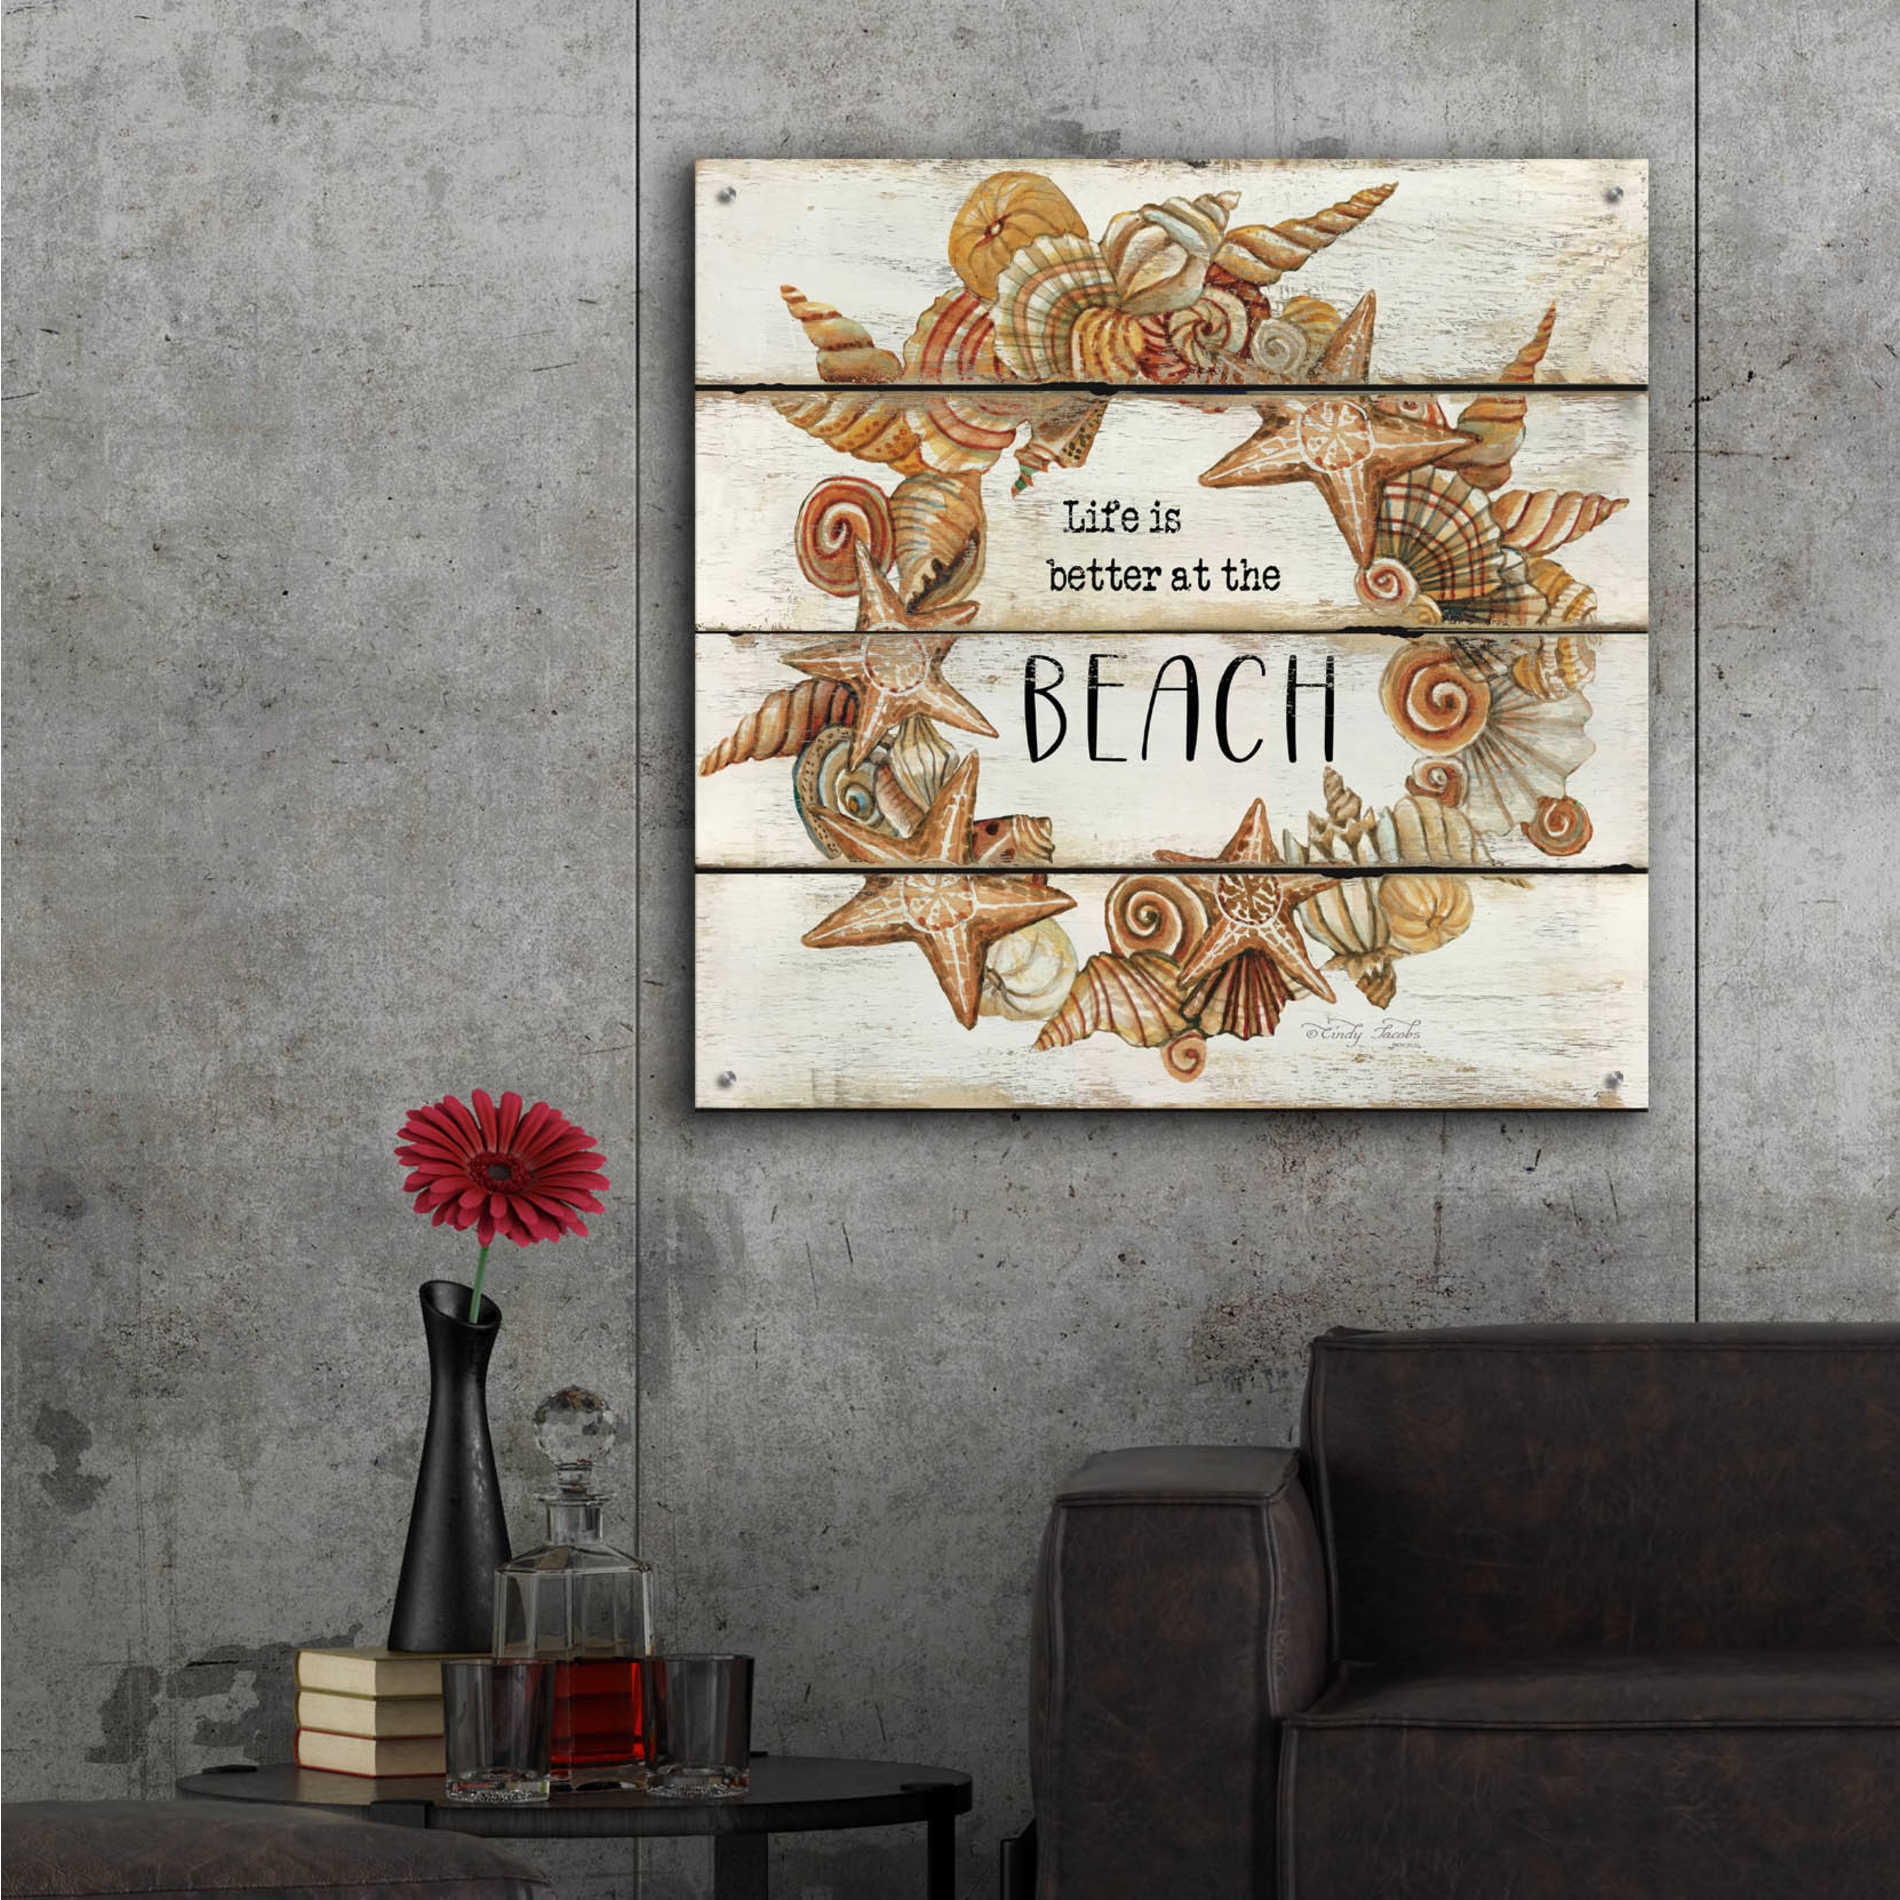 Epic Art 'Life is Better at the Beach' by Cindy Jacobs, Acrylic Glass Wall Art,36x36